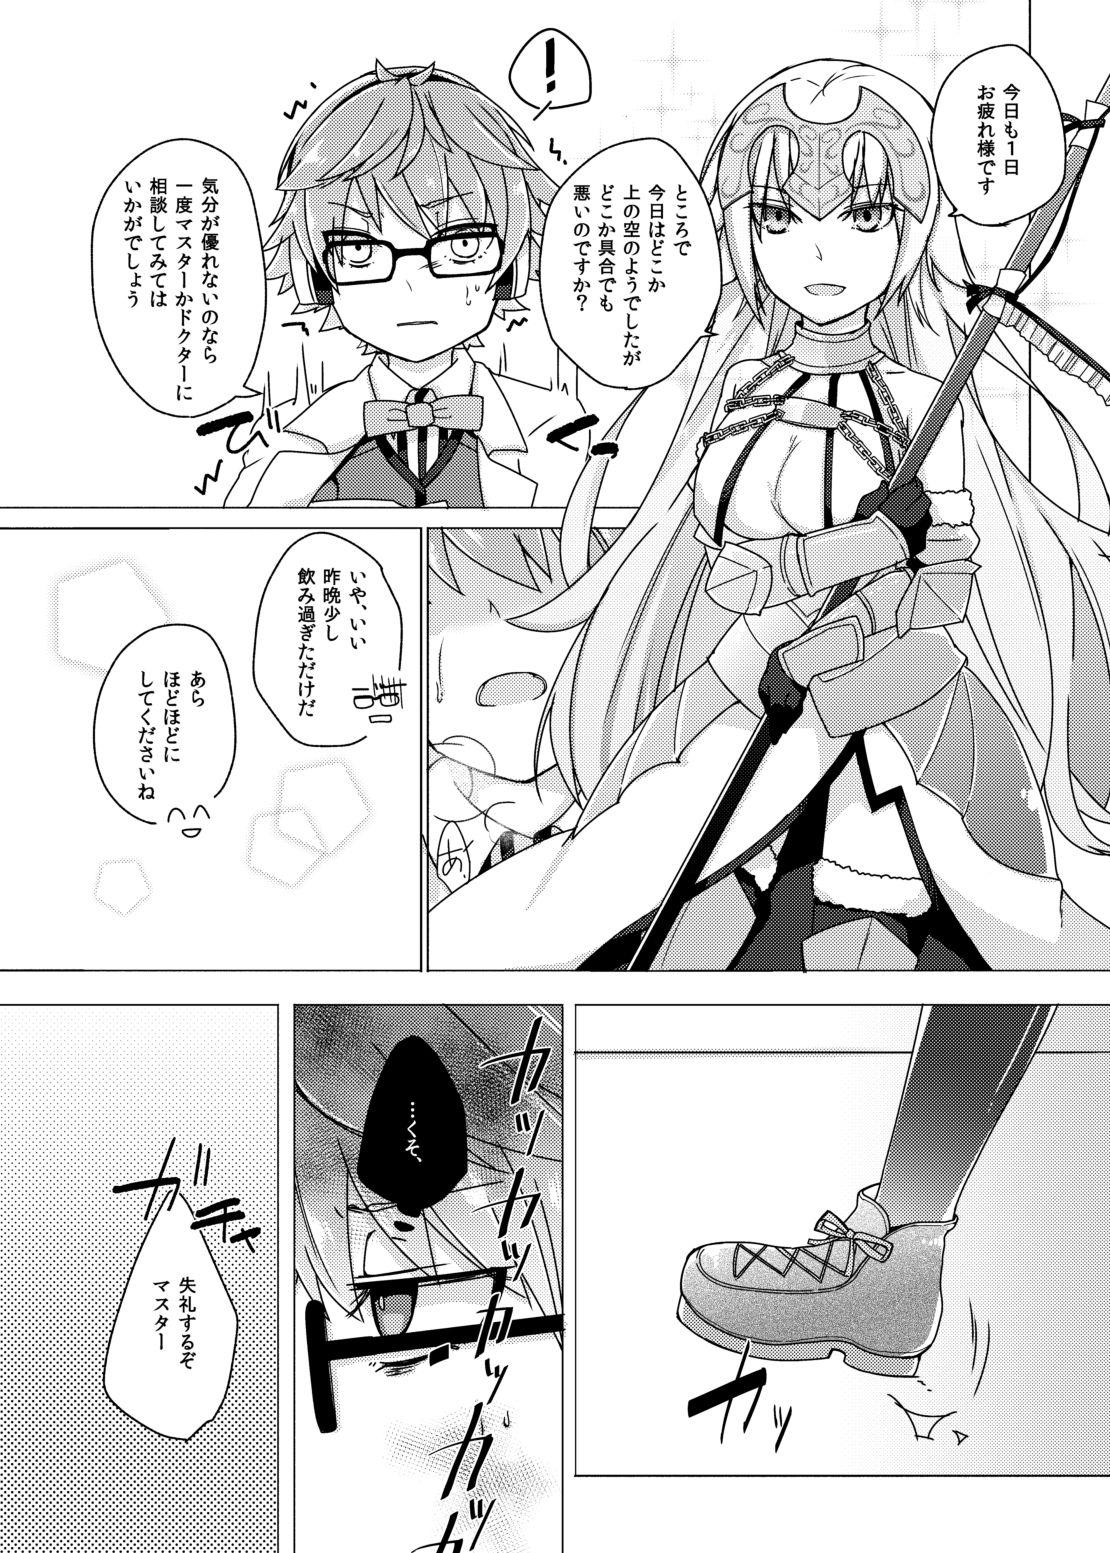 Grosso ぐだデル寄稿まんが再録 - Fate grand order Pantyhose - Page 2